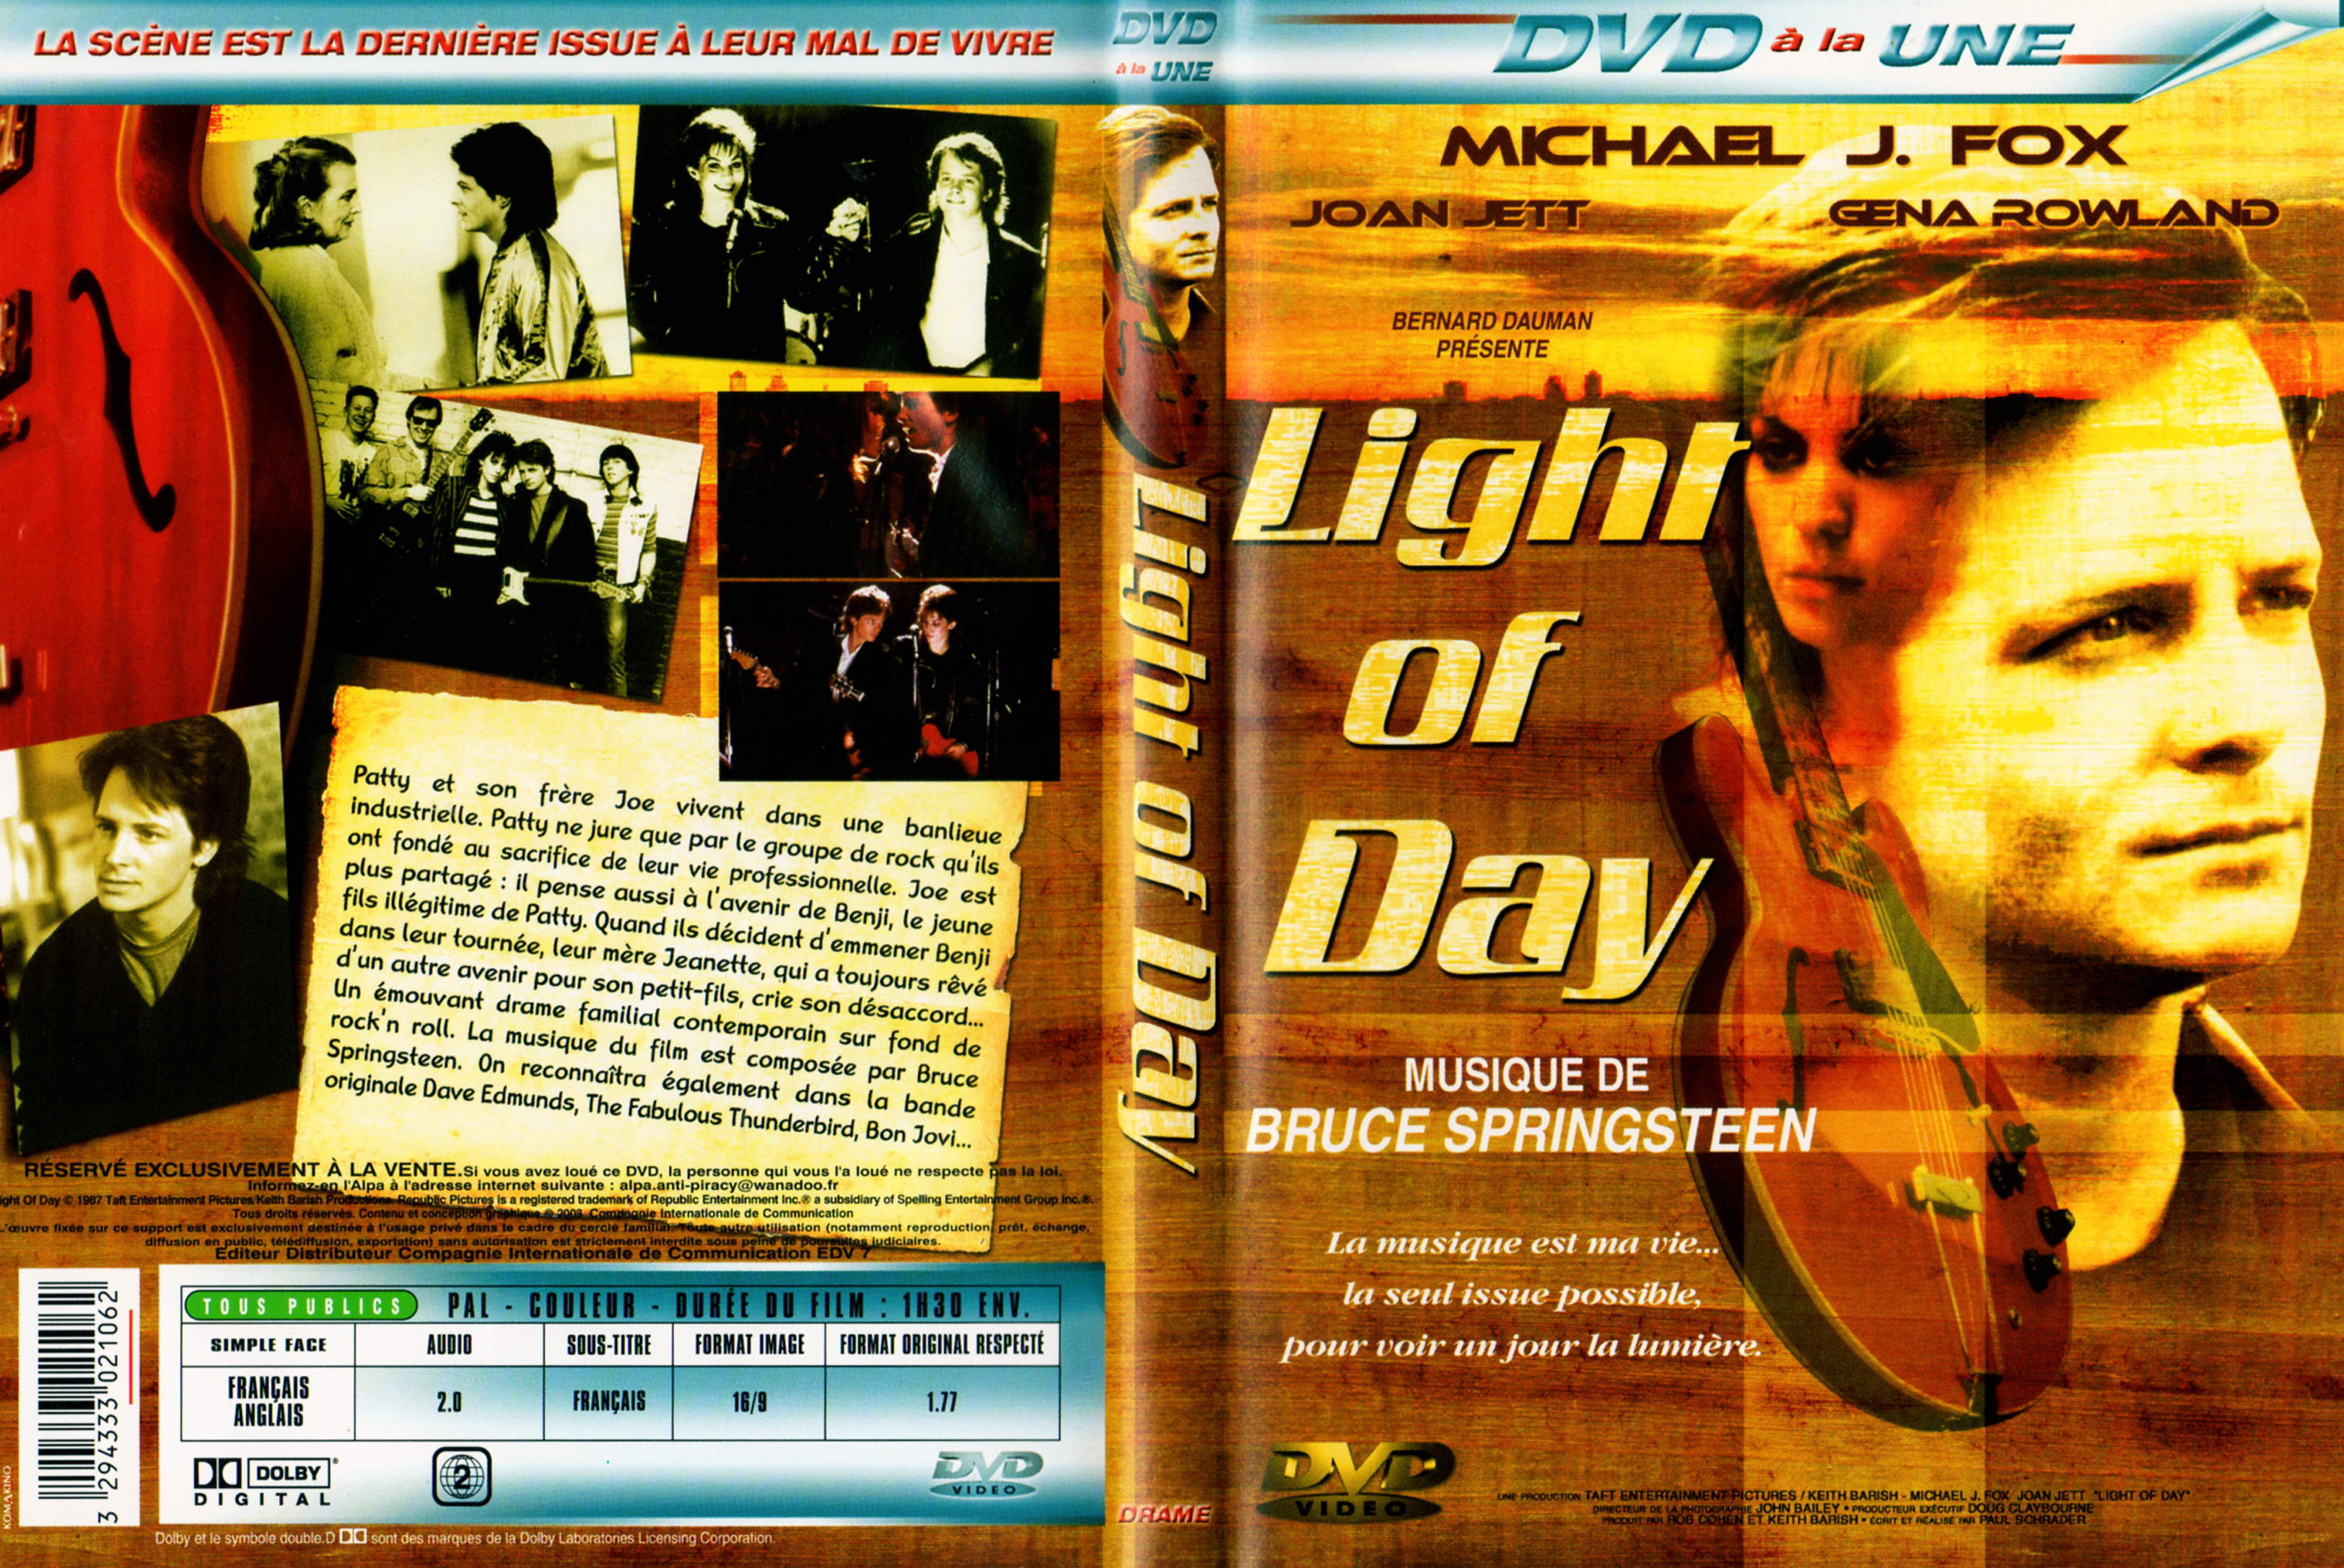 Jaquette DVD Light of day